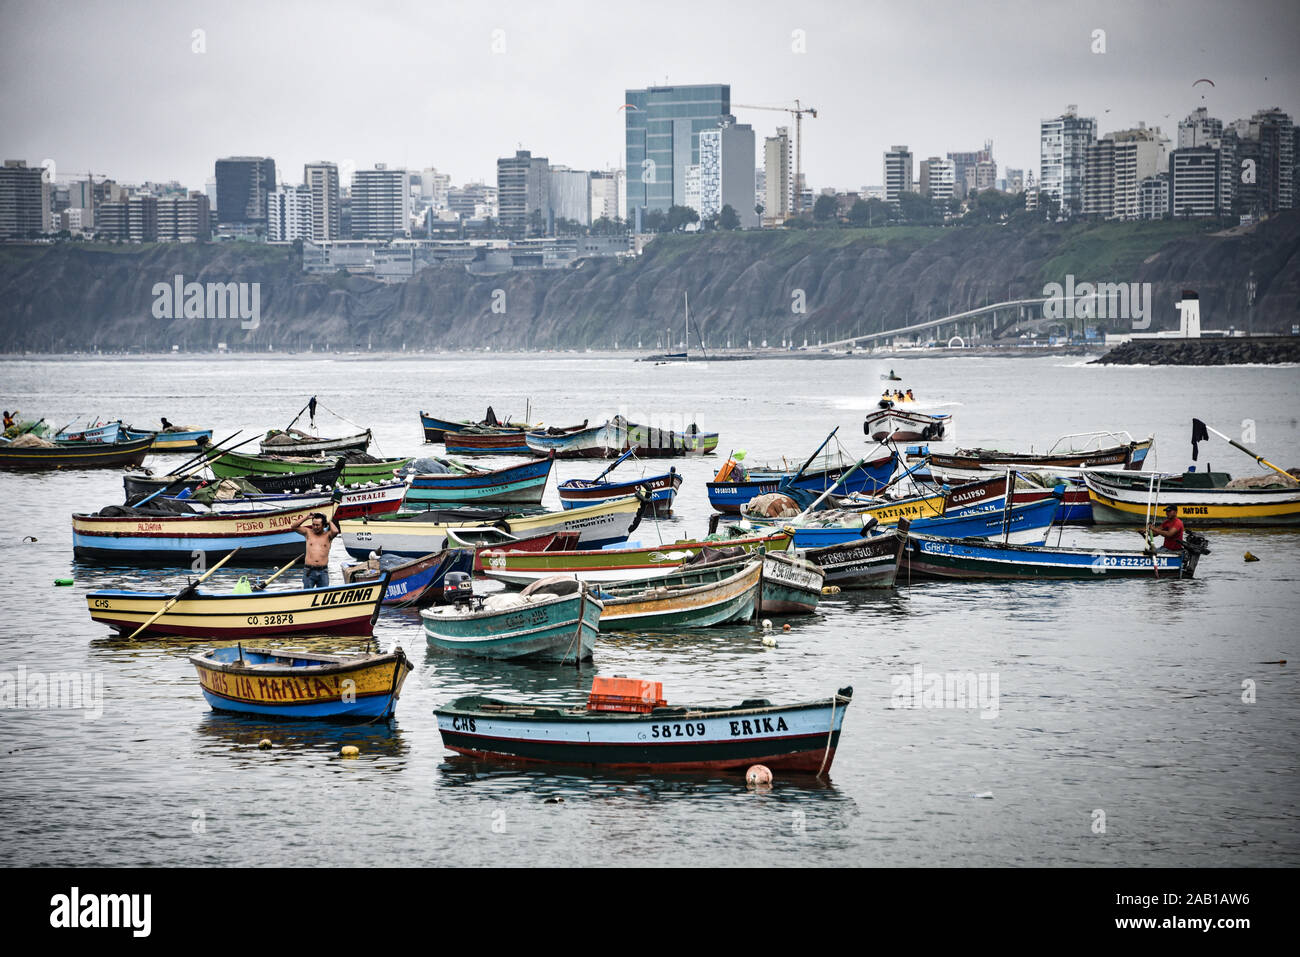 Lima, Peru - Nov 17, 2019: Fishing boats in Chorrillos harbour against the backdrop of the commercial Miraflores district Stock Photo